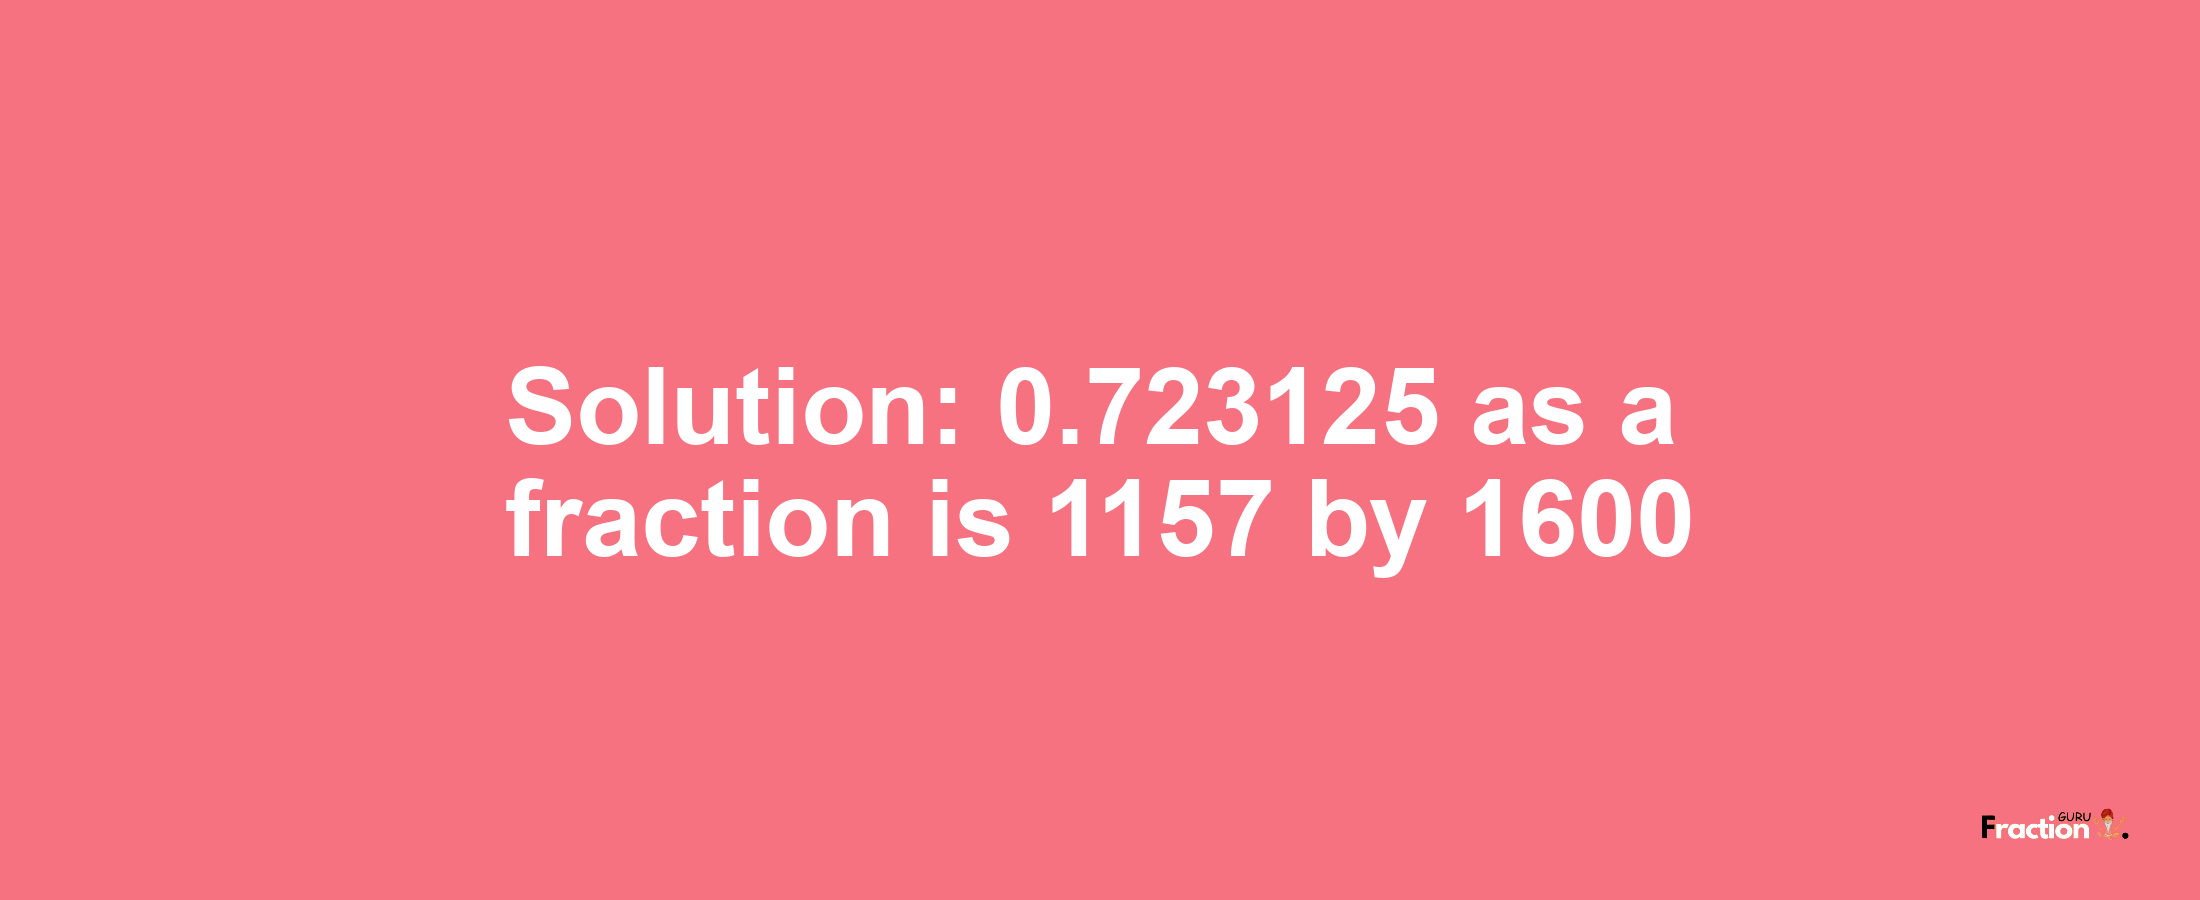 Solution:0.723125 as a fraction is 1157/1600